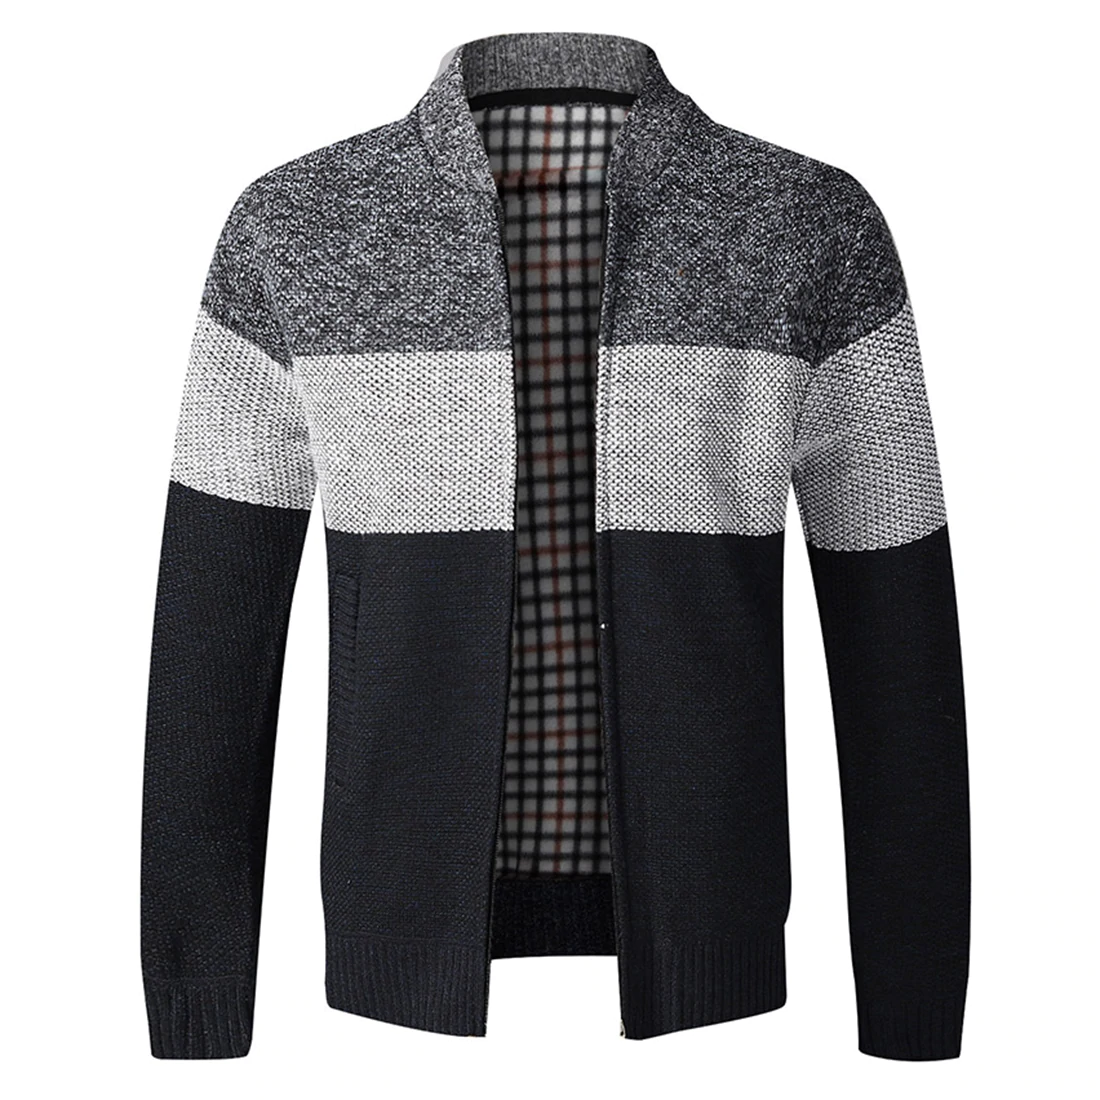 Classic Men Autumn Sweater Coat Thick Casual Sweater Cardigan Men Slim Fit Knitwear Outerwear Warm Knitted Sweater Jacket